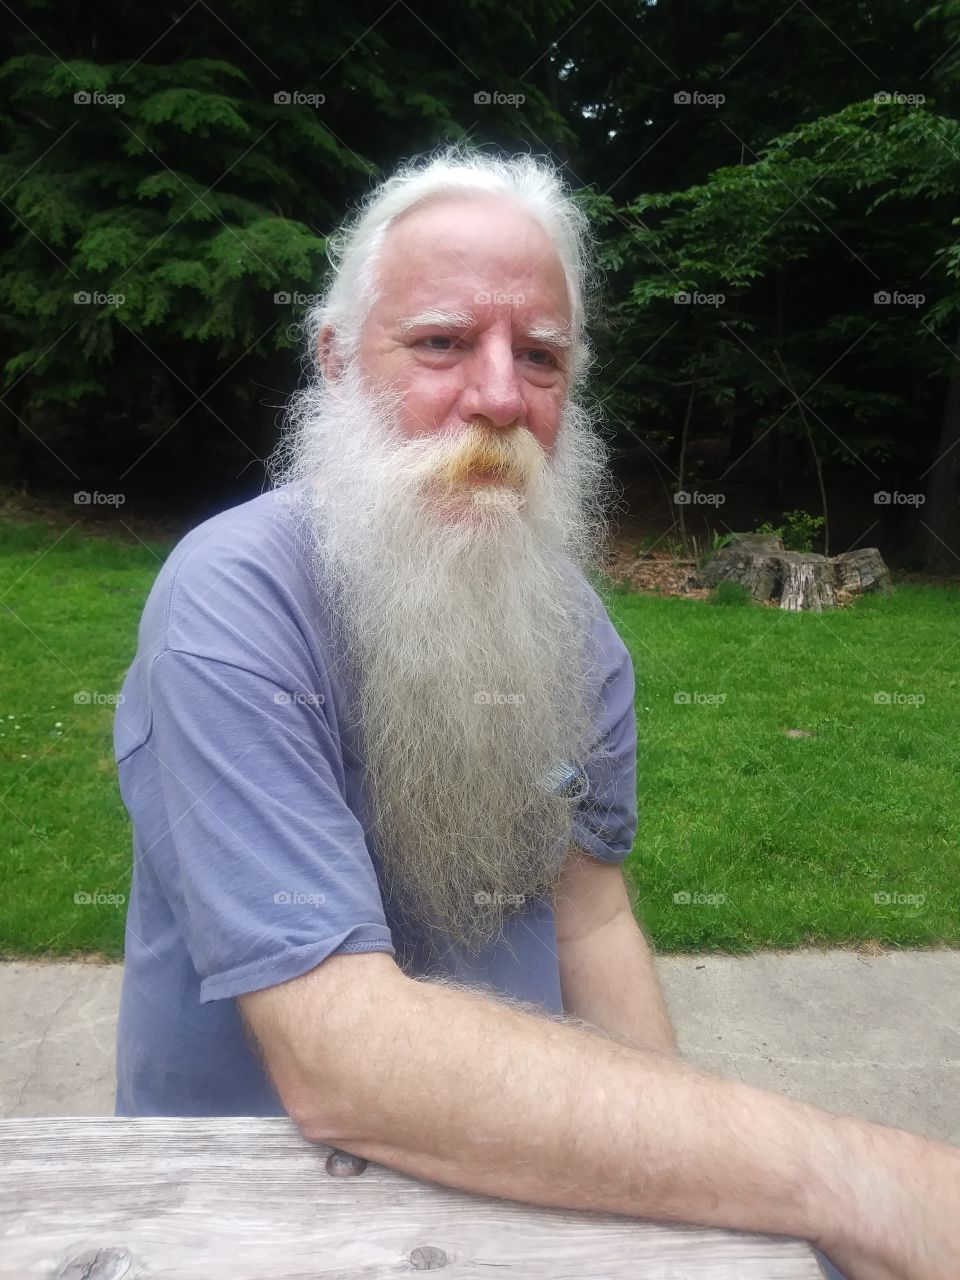 Bearded man sitting outside in a park setting